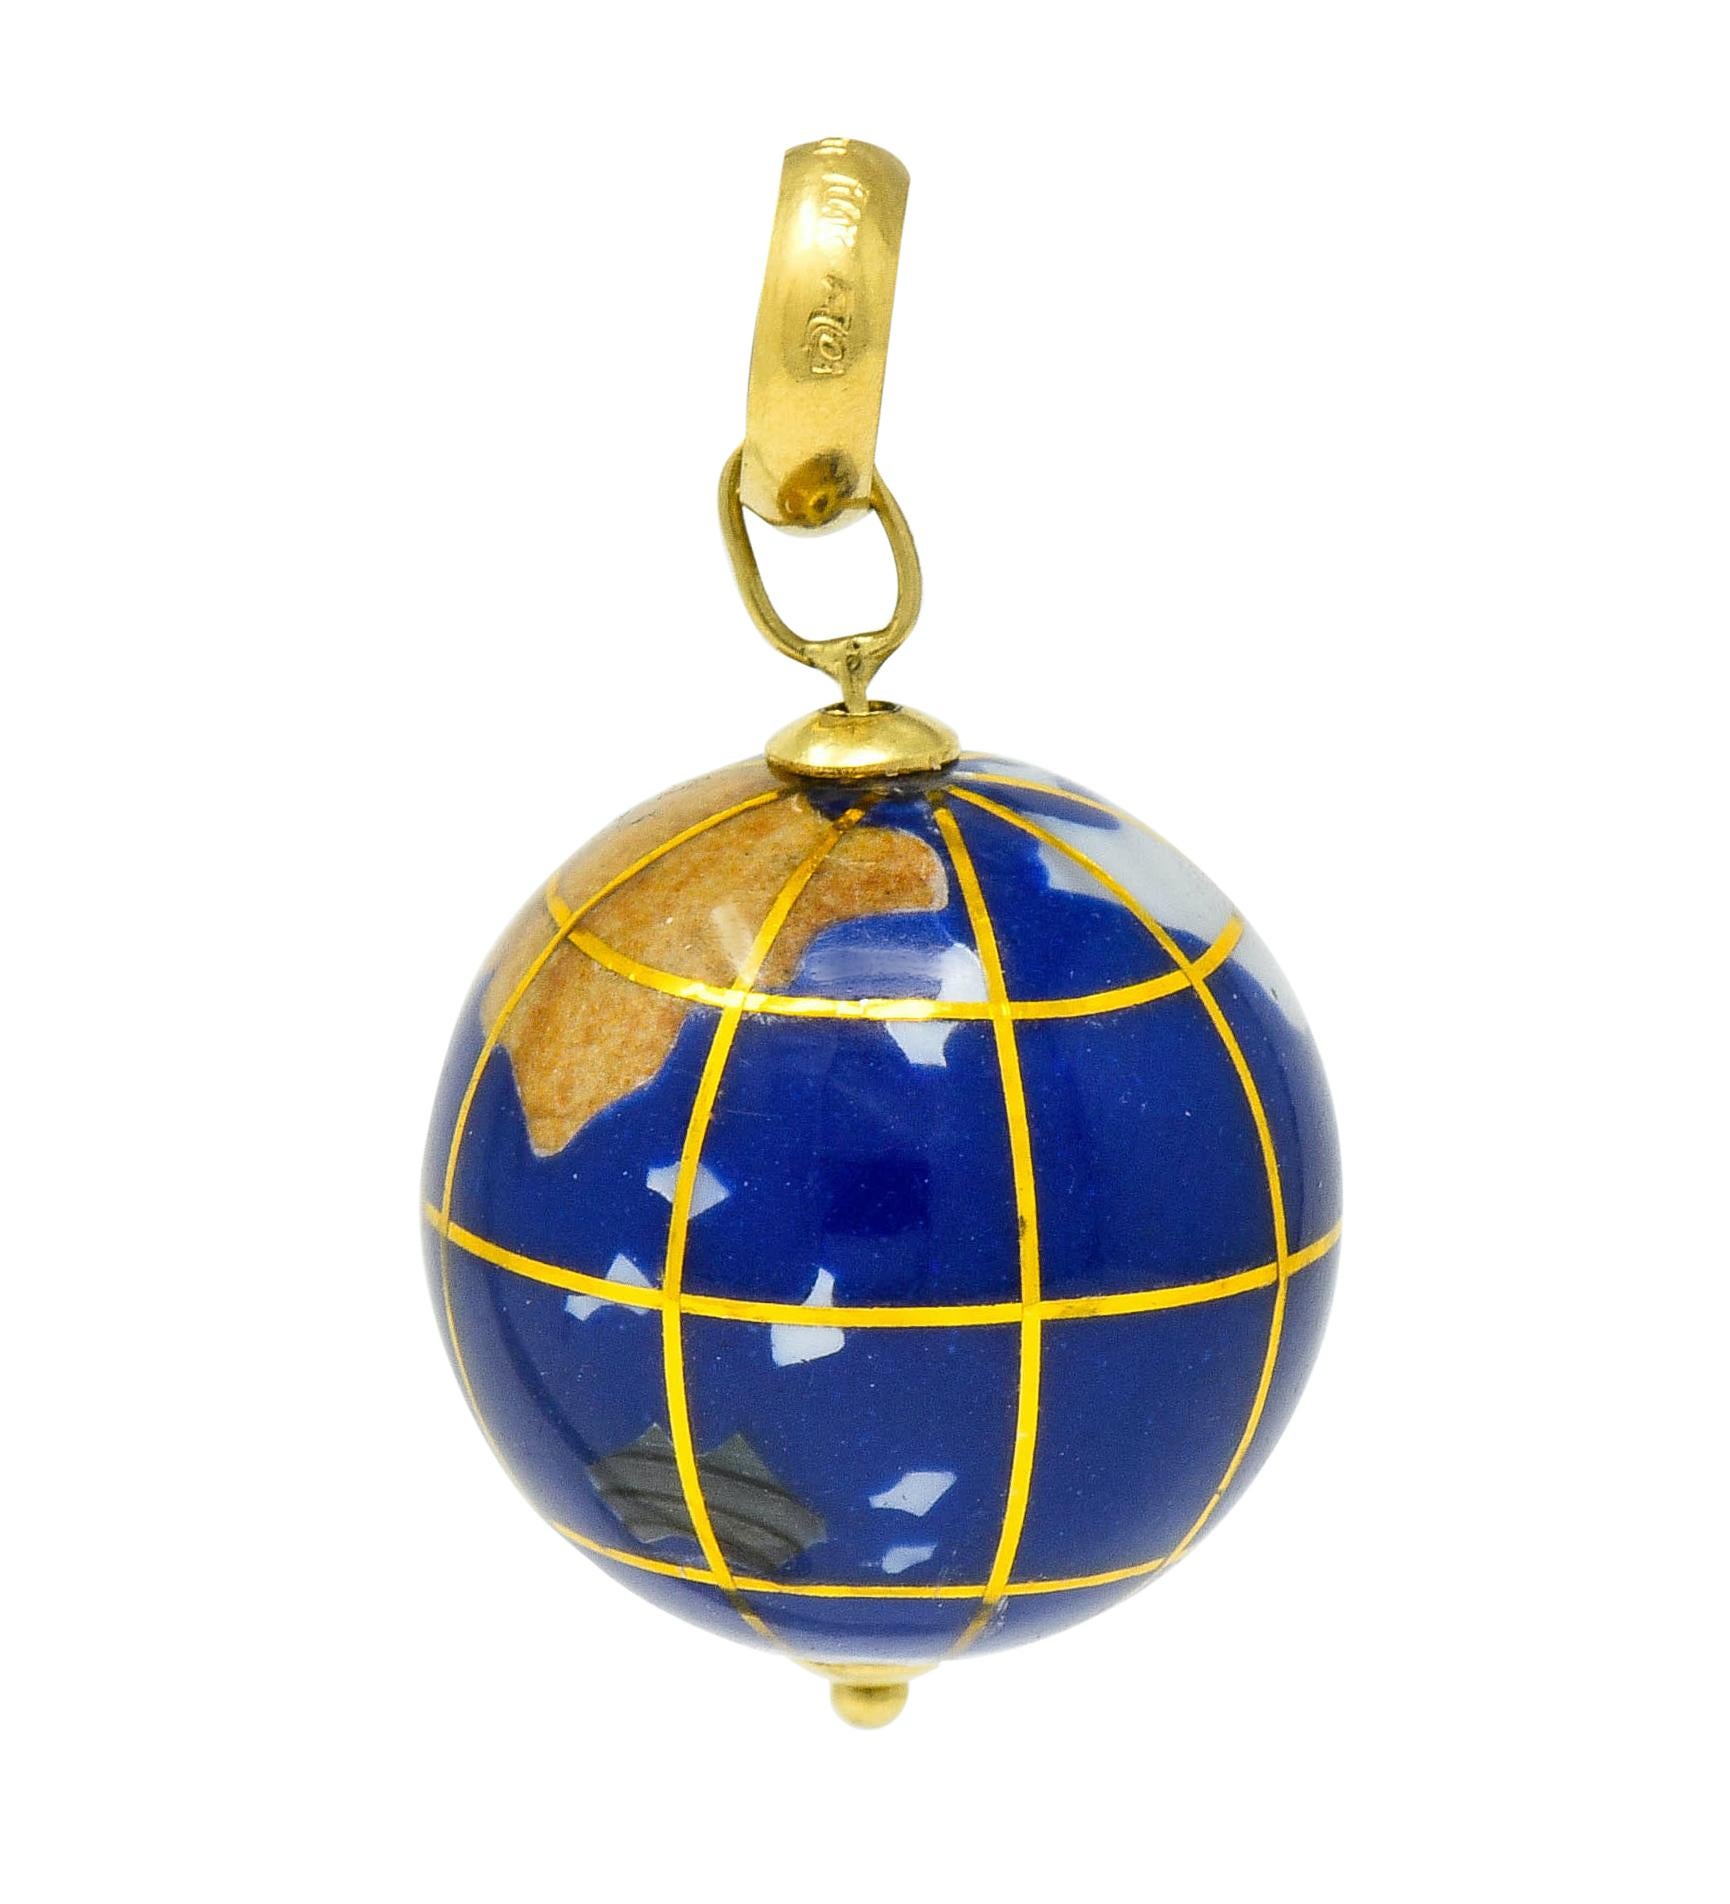 Pendant is designed as a round globe with bright blue color accented by metallic latitude and longitude grid lines

Countries are represented as inlaid mother-of-pearl, abalone, unakite, and others; glossed with resinous finish

Spins on axis with